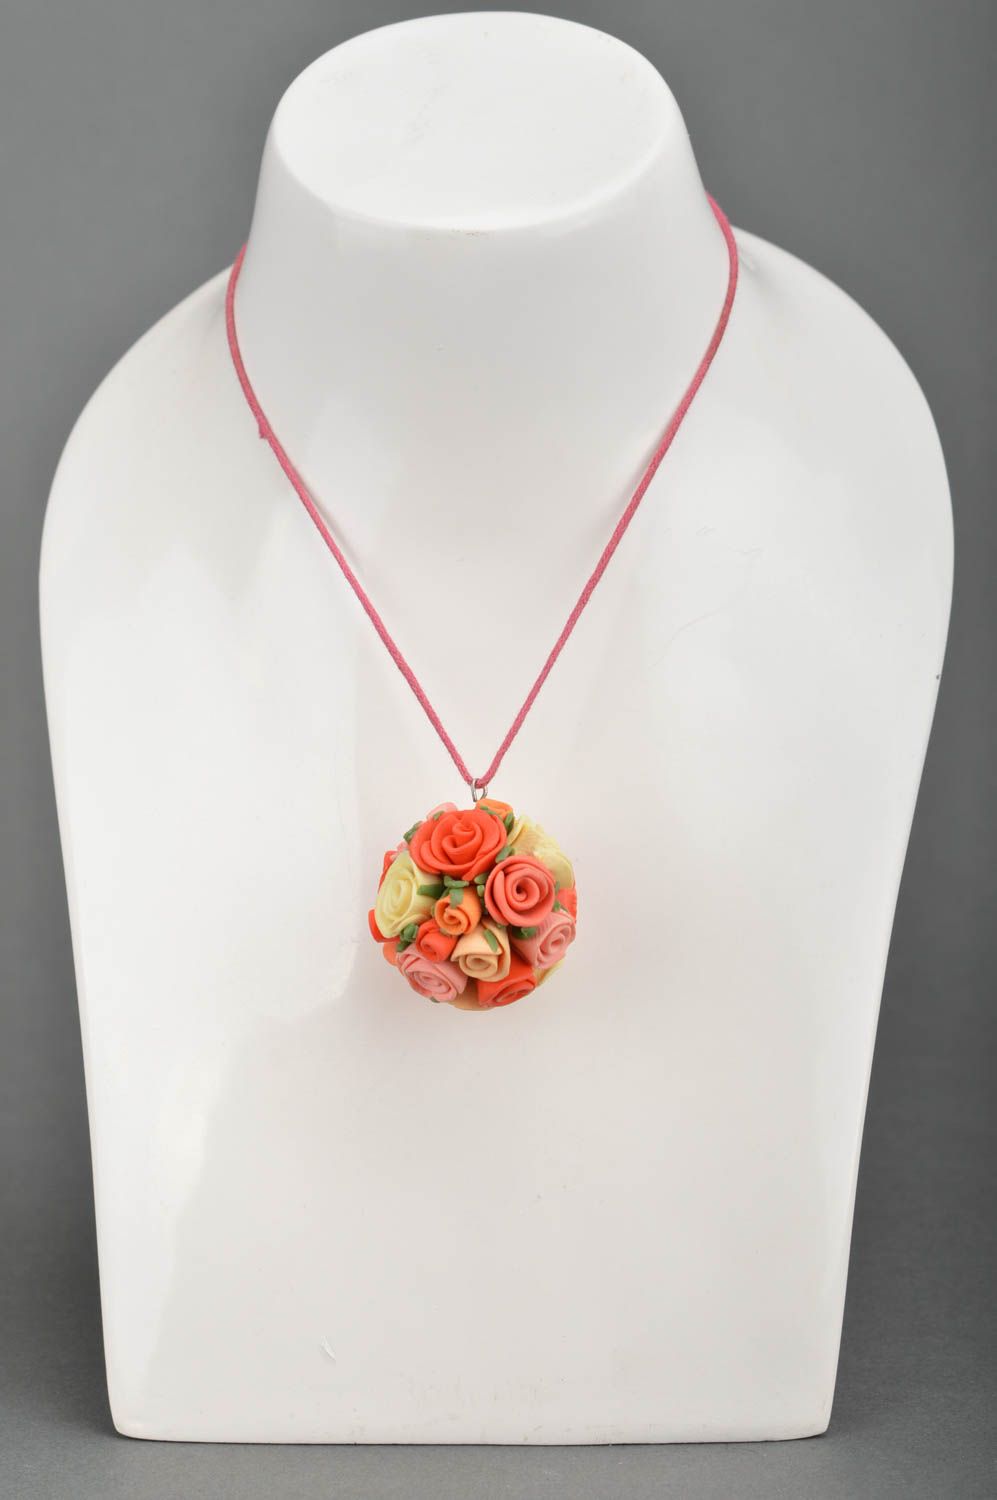 Handmade gorgeous pendant made of polymer clay in orange tones on cord photo 2